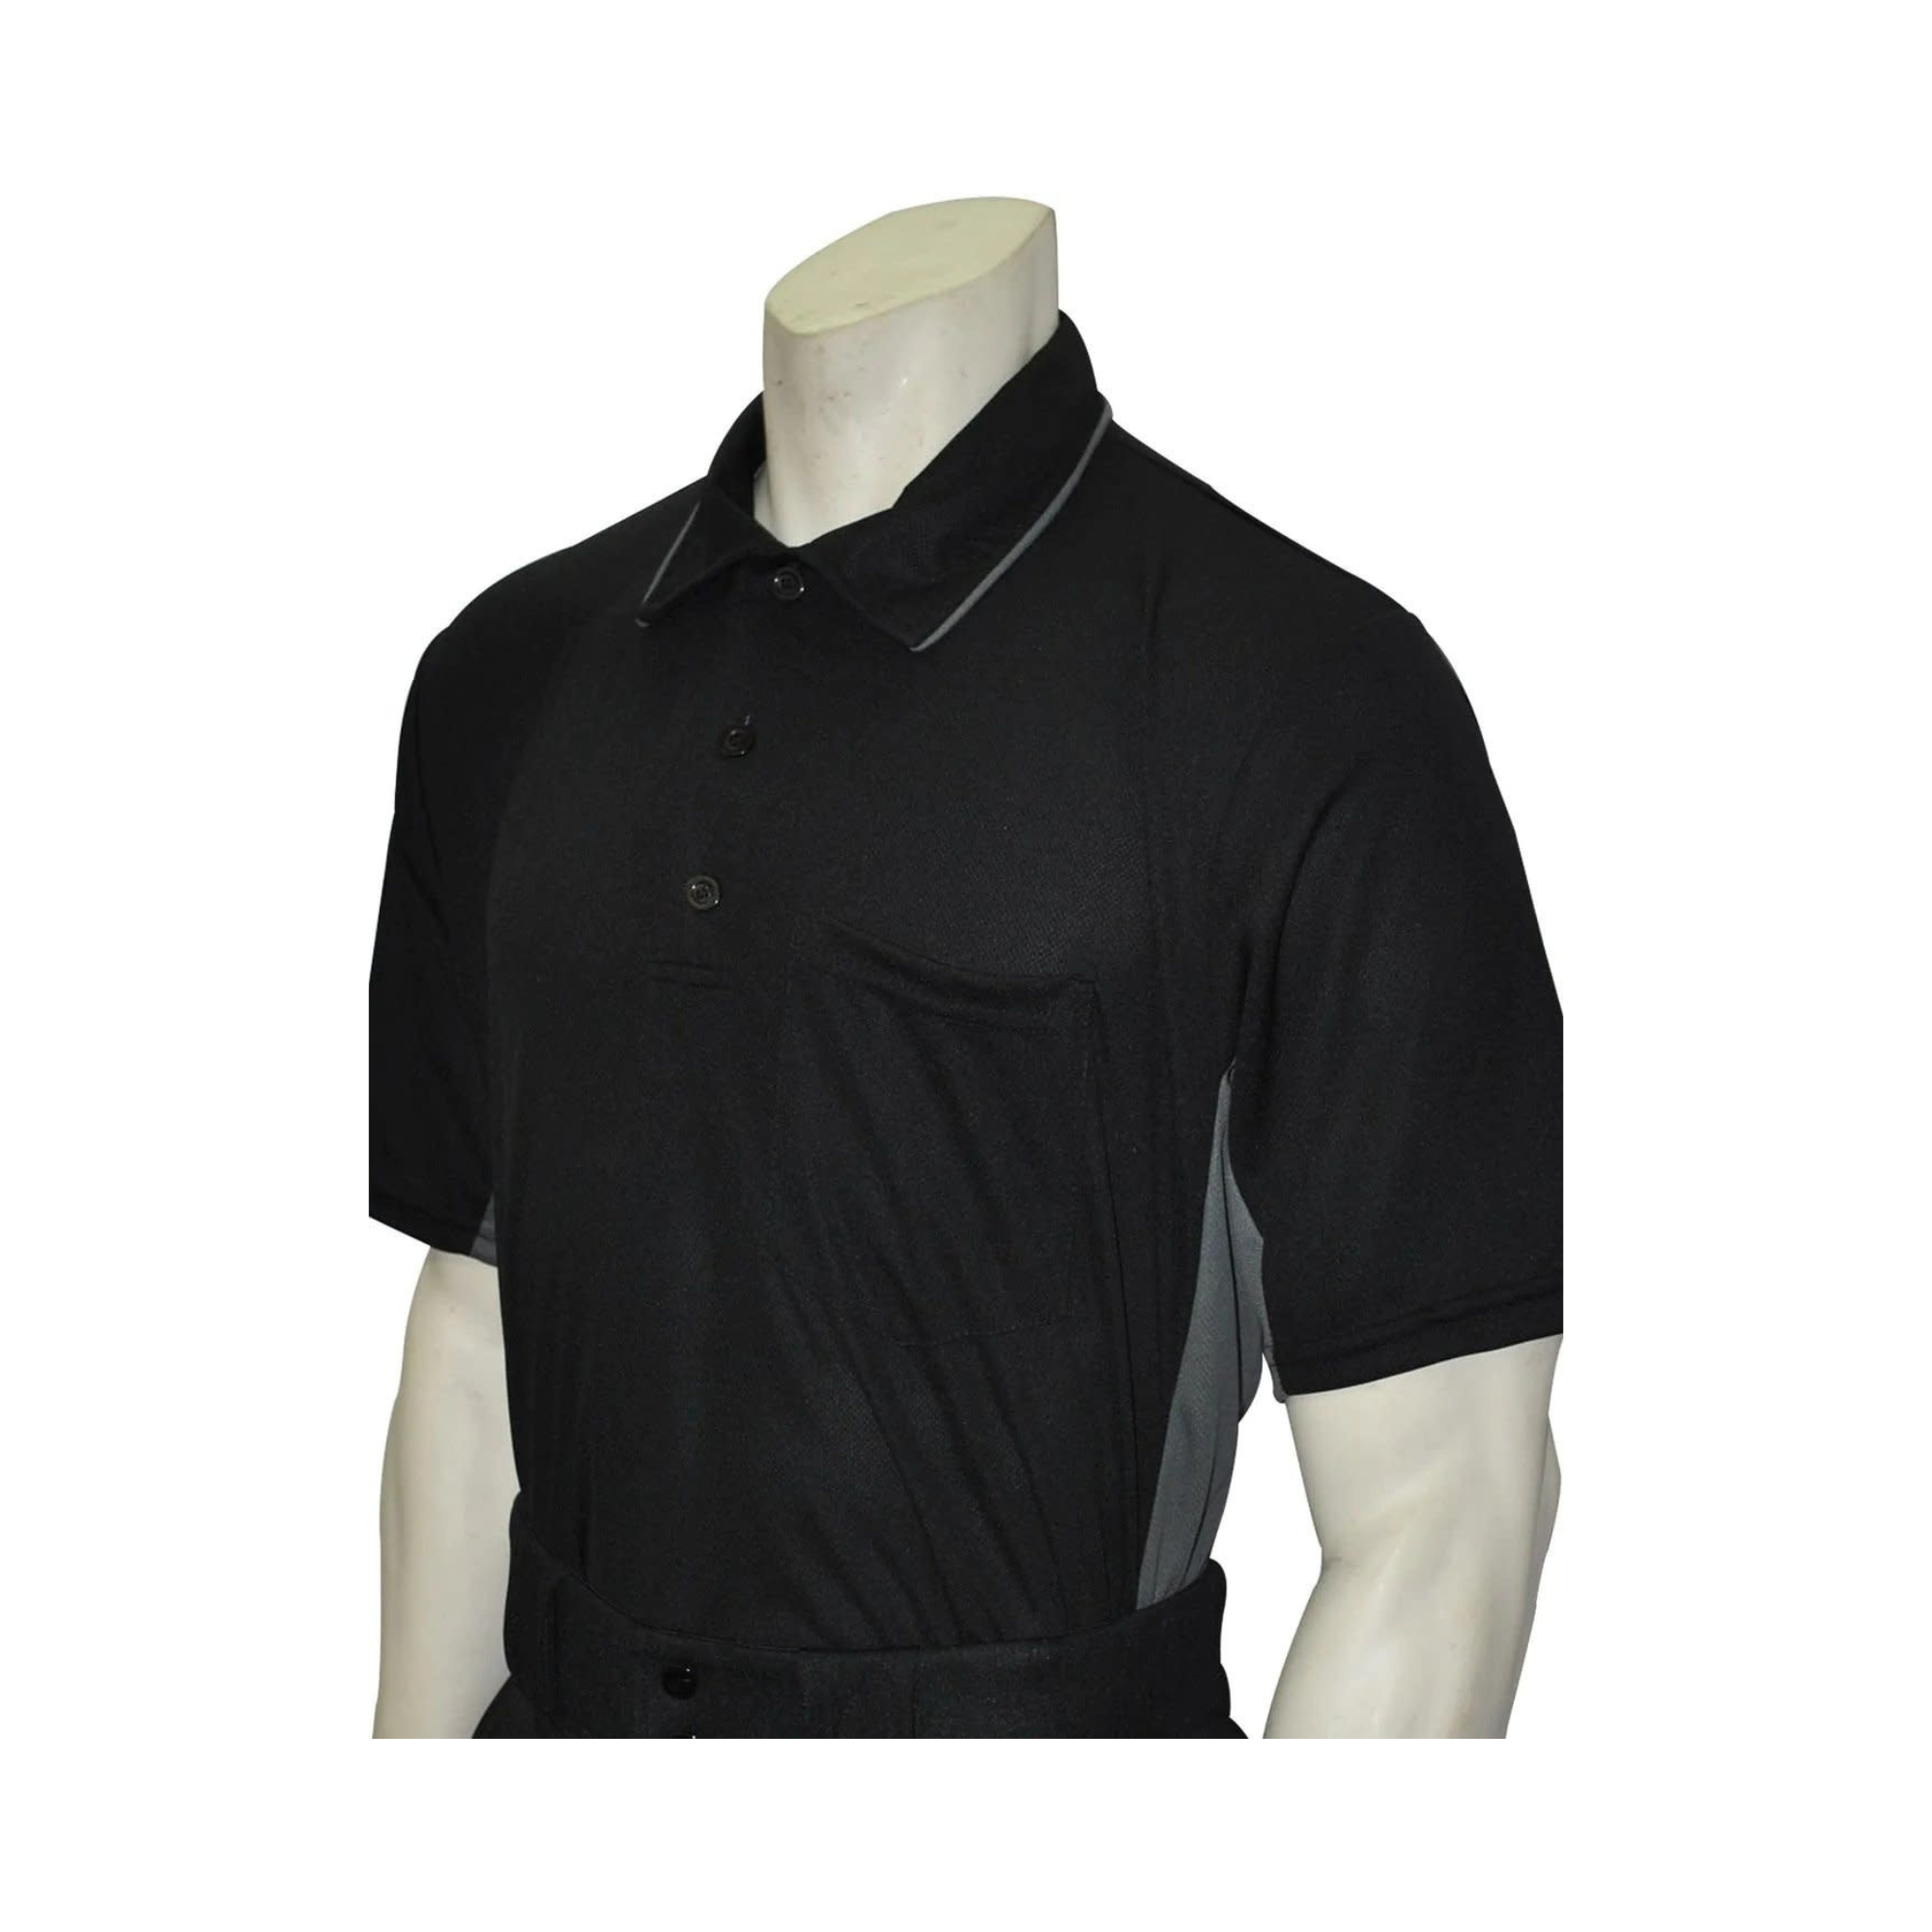 Smitty MLB Style Umpire Shirt with Side Panel